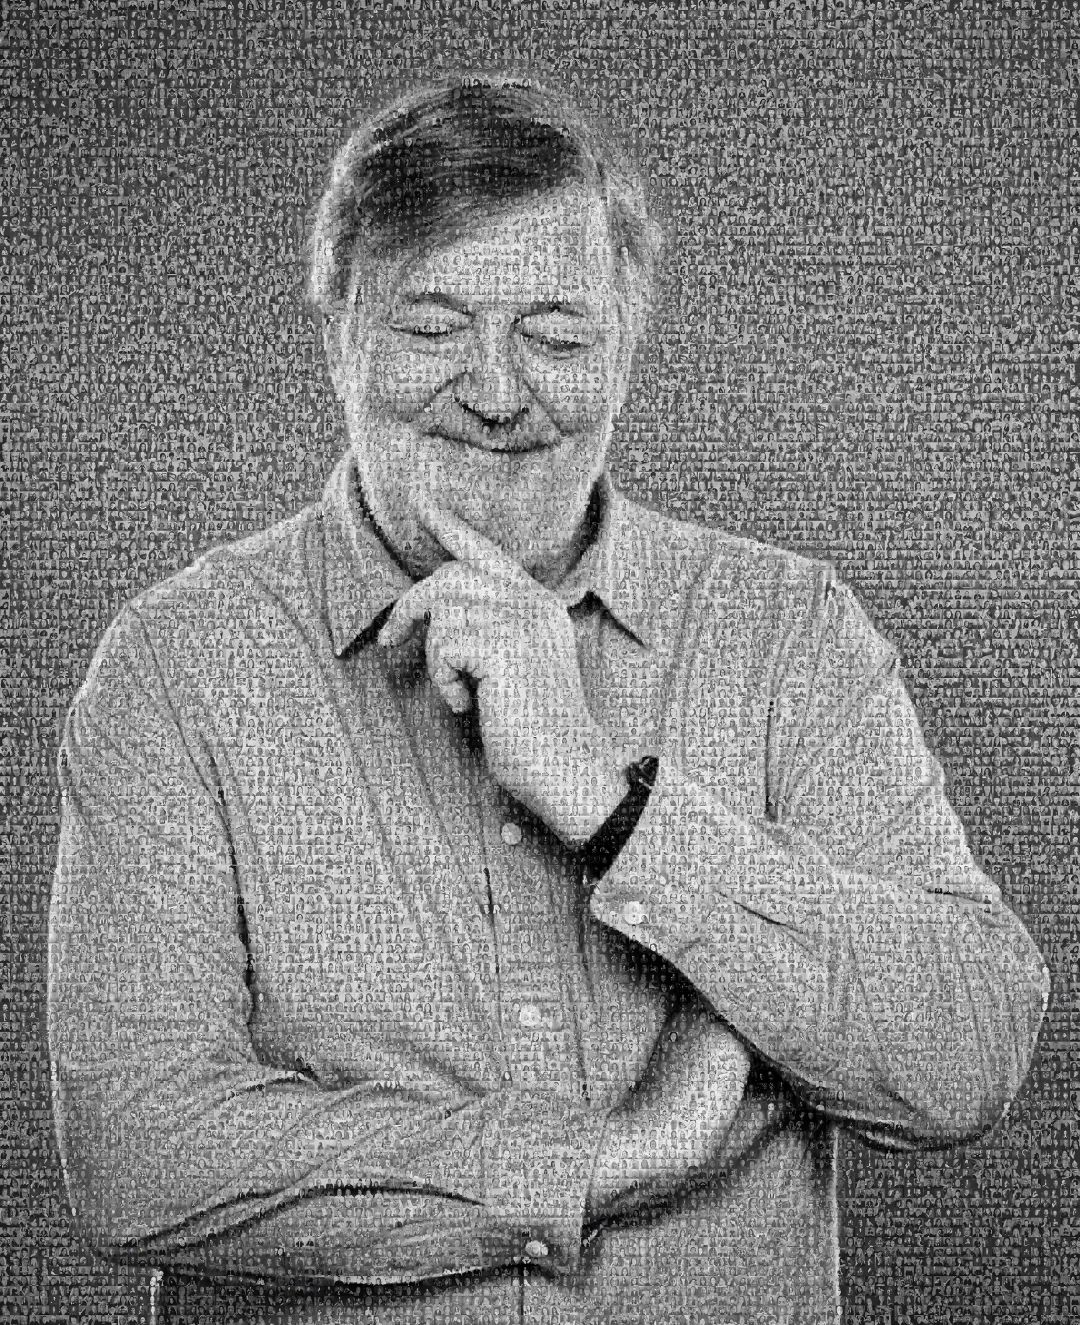 Stephen Fry taking a moment as a mosaic of thousands of other portraits